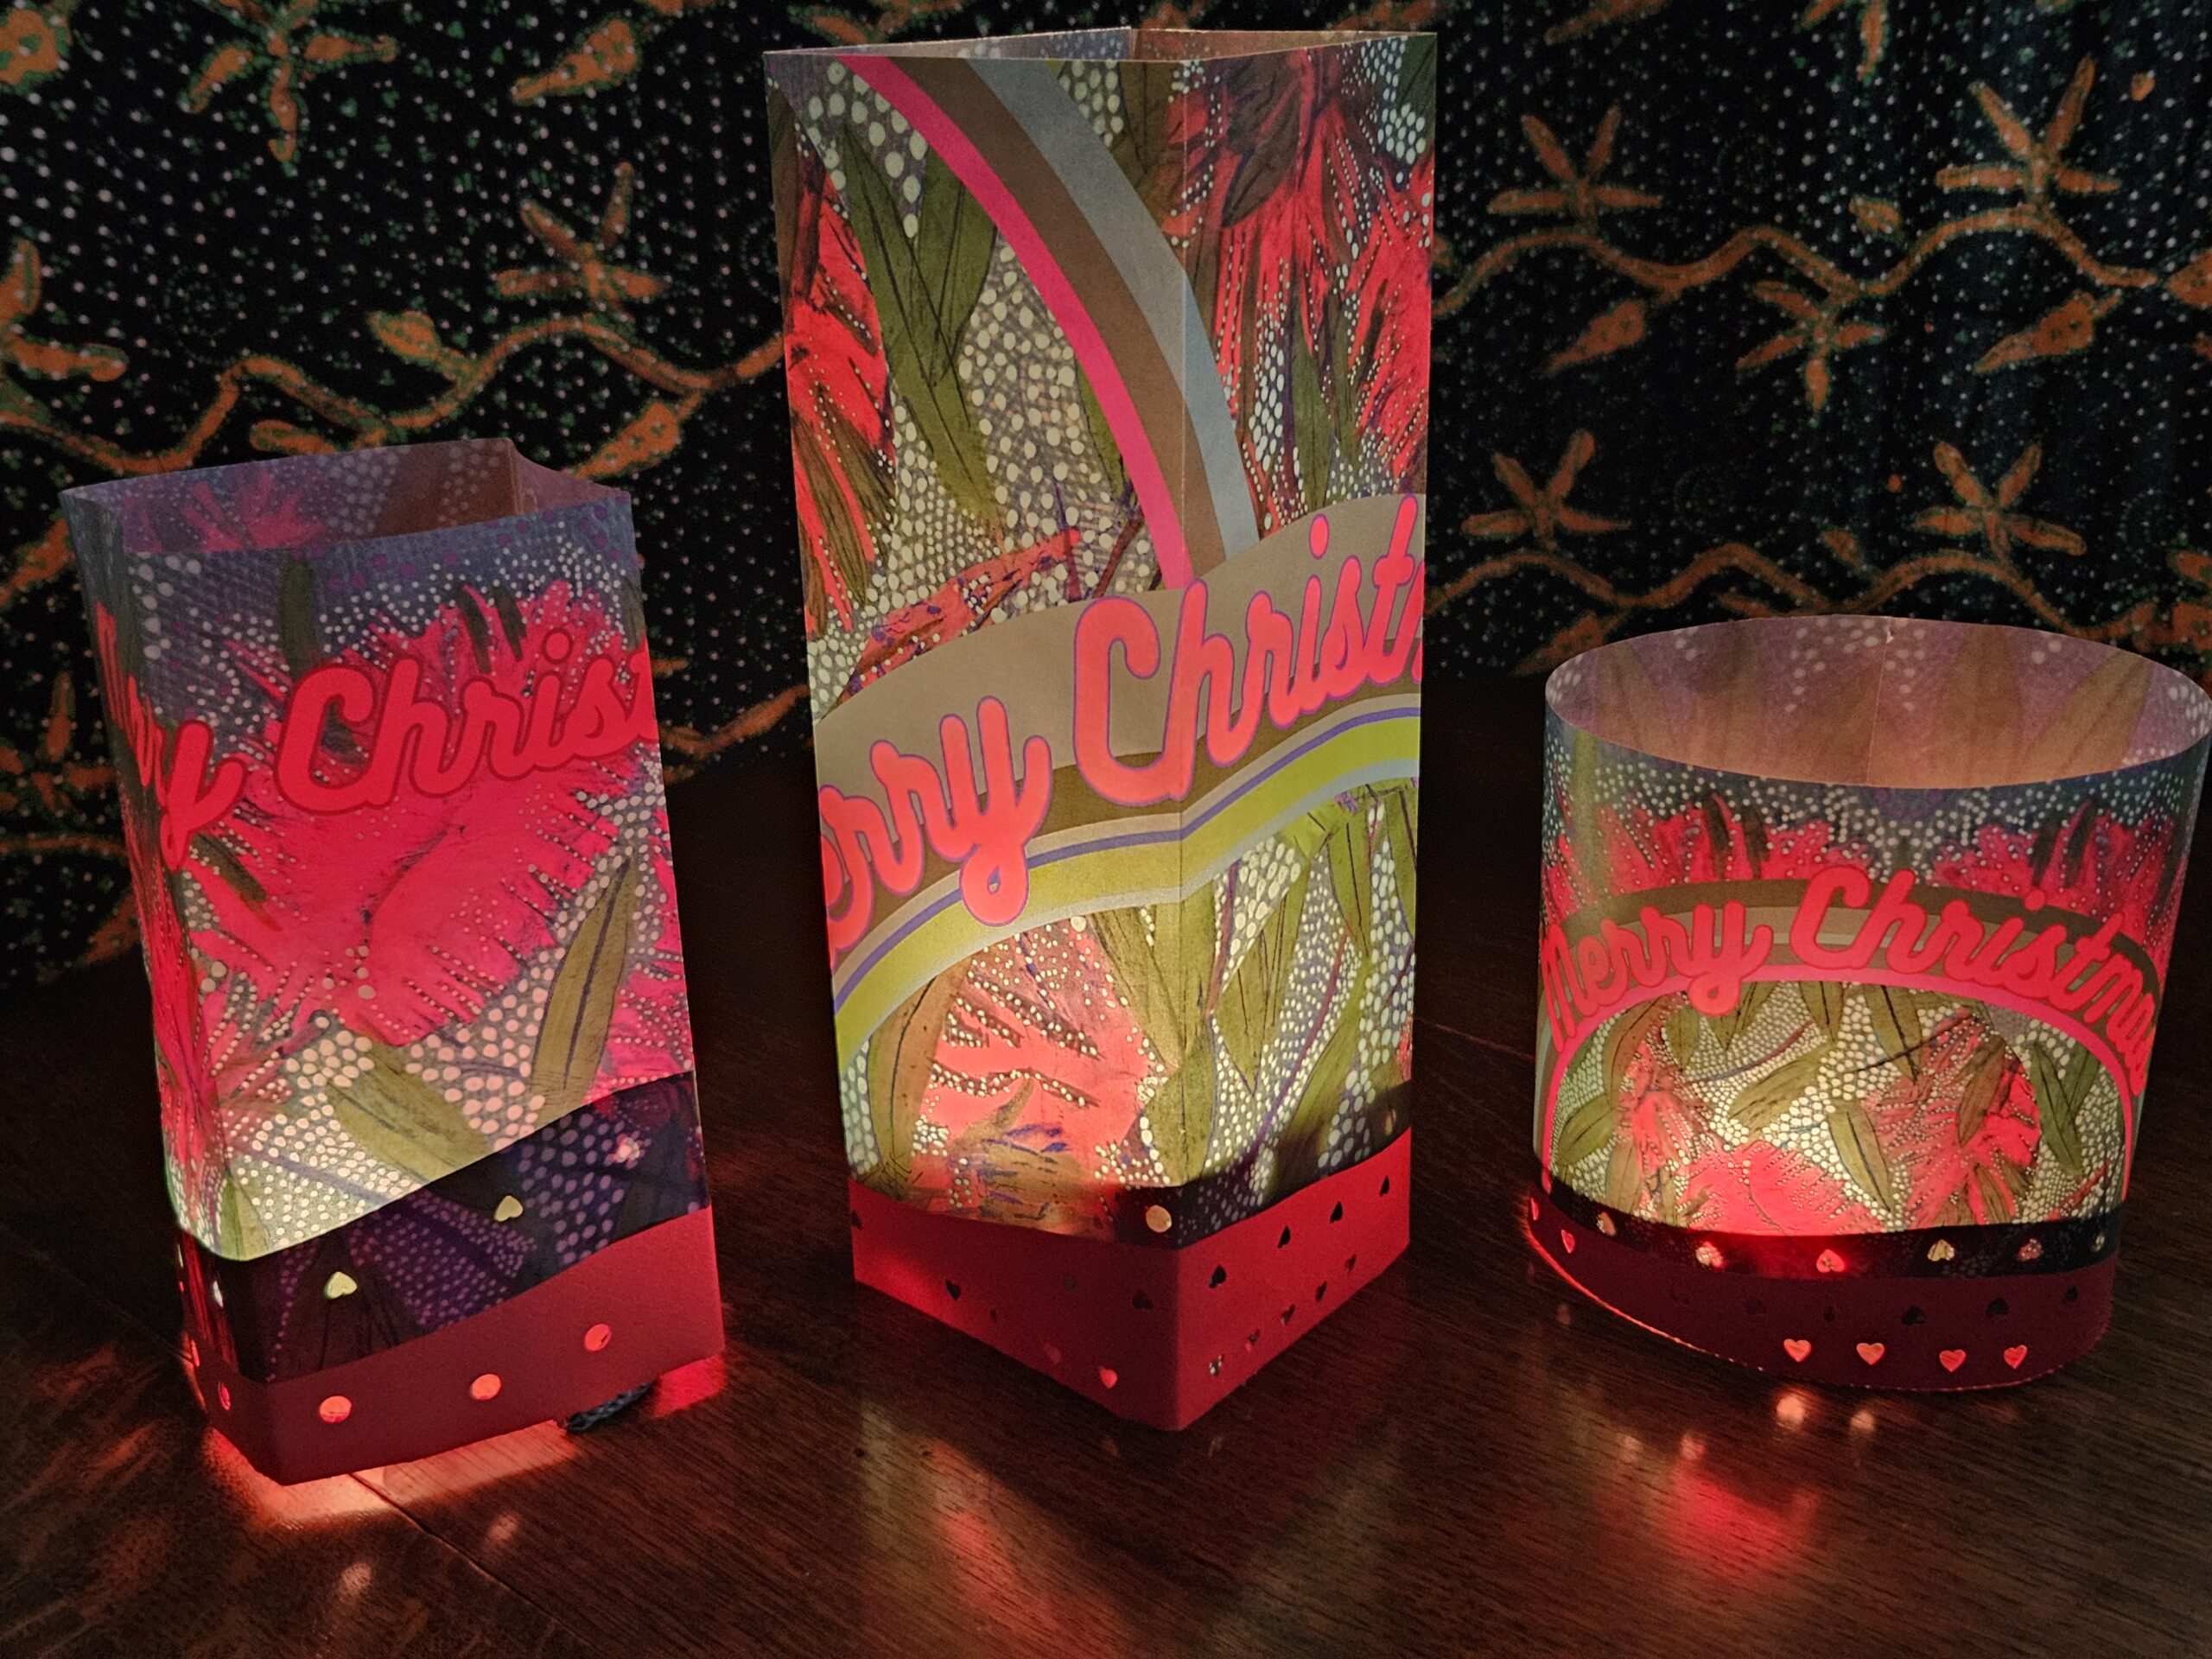 A collection of 3 Paper Christmas Lanterns with a summer hemisphere flavour.